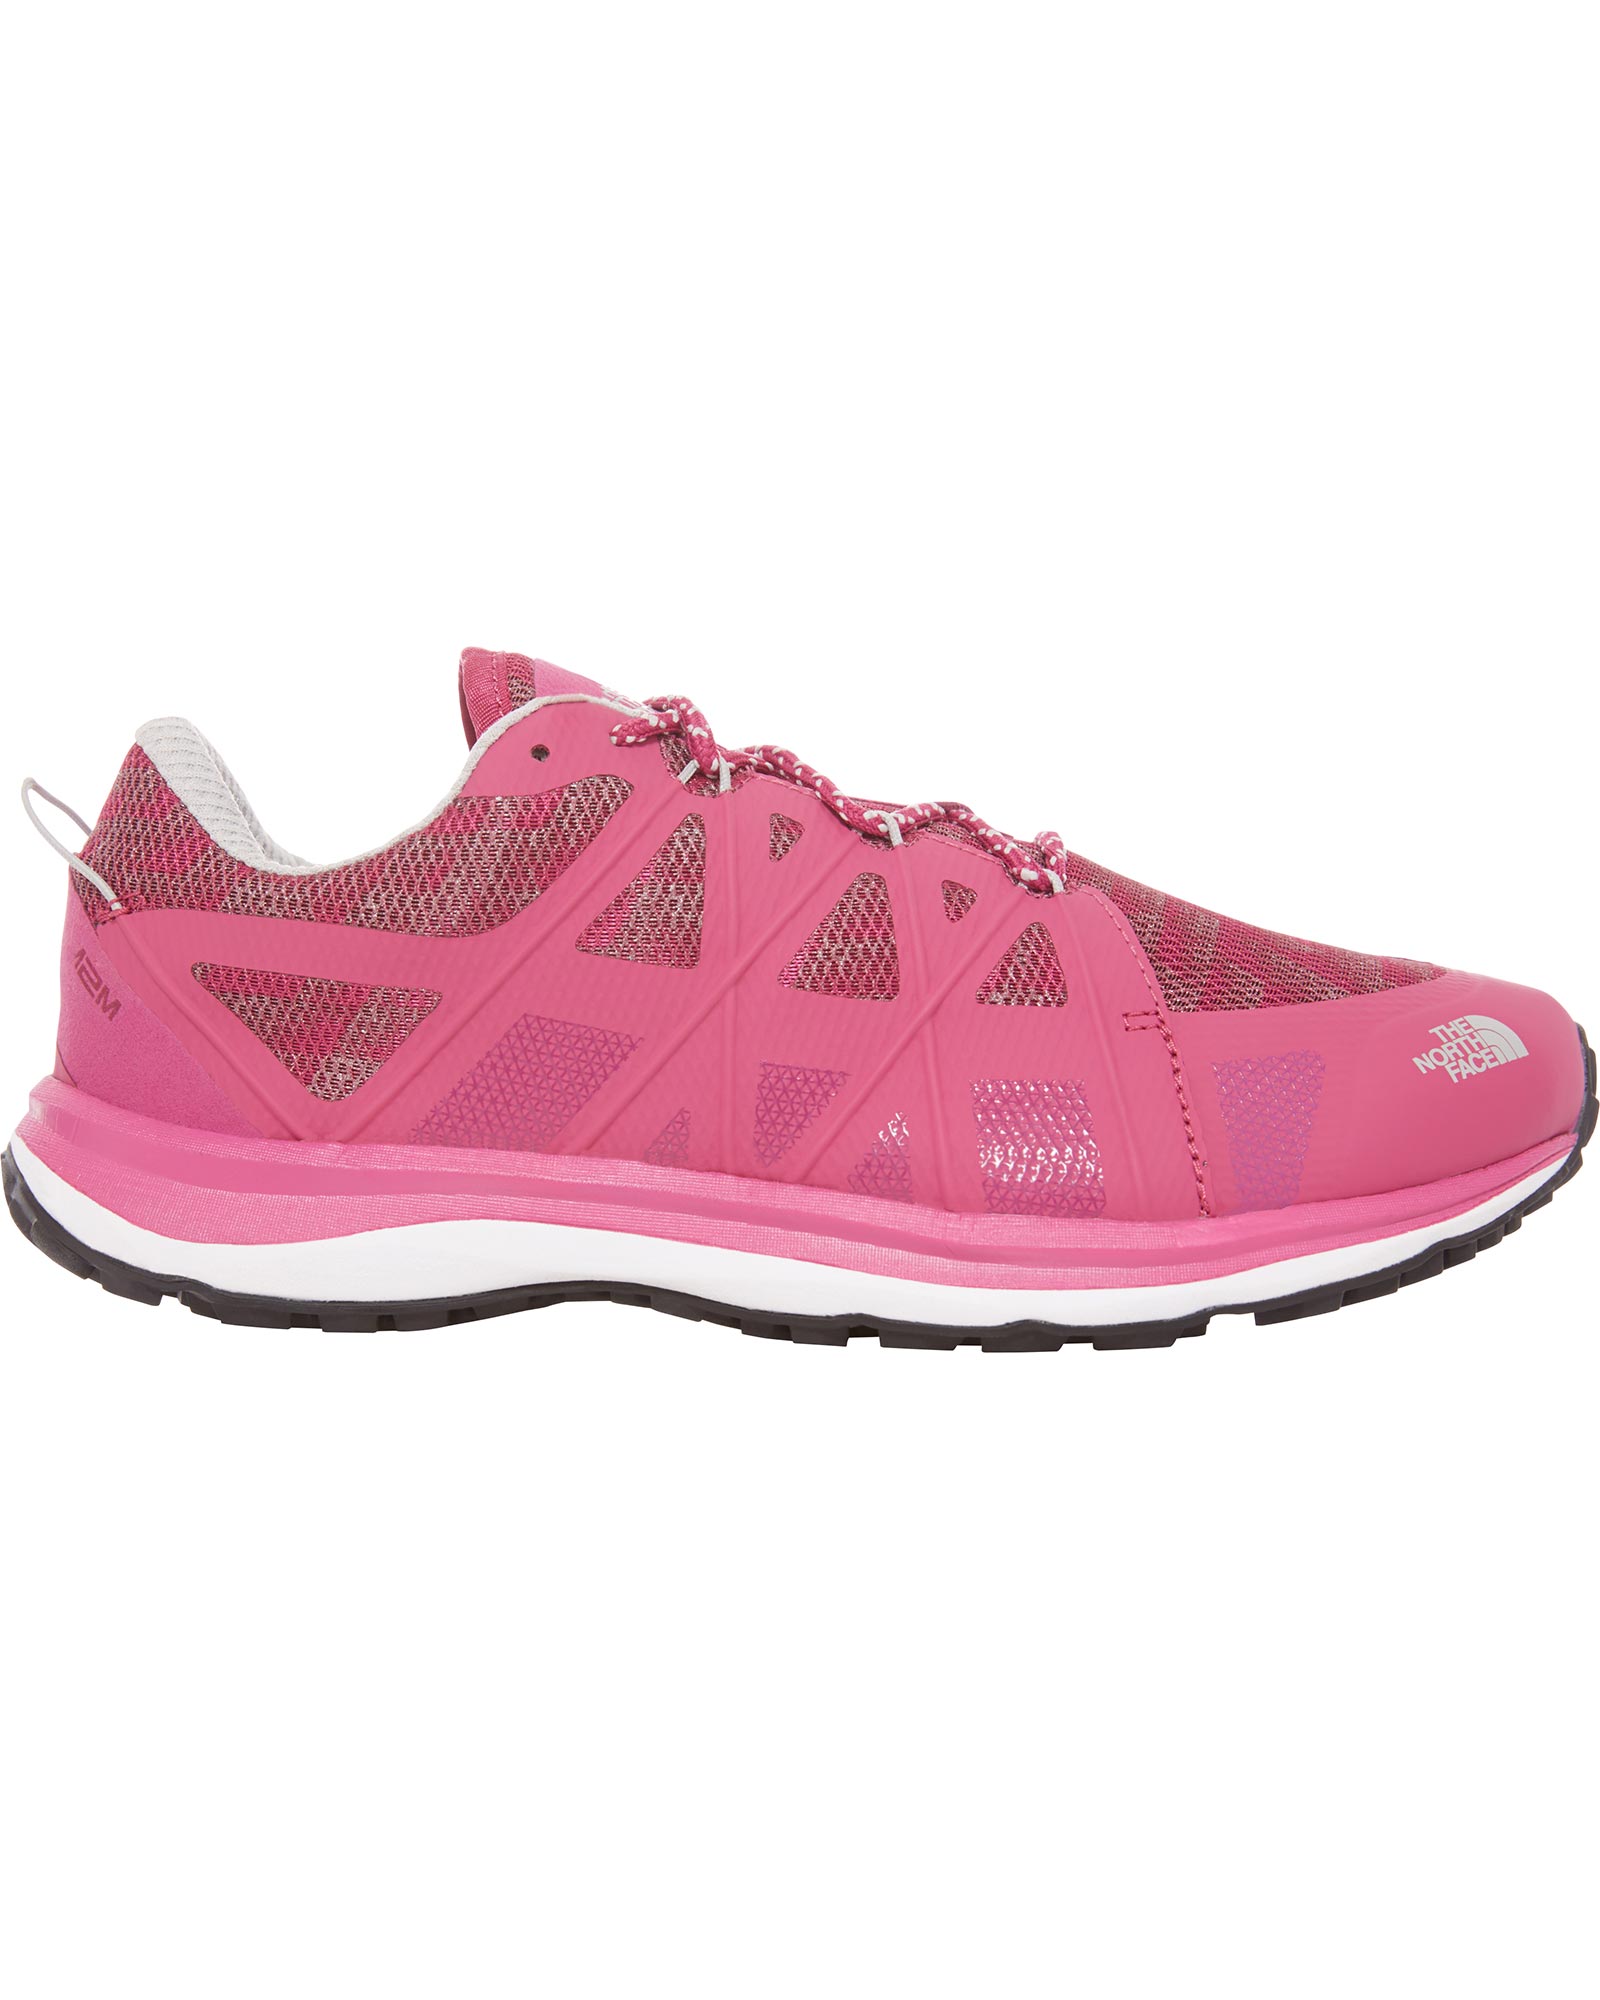 The North Face M2M Women’s Shoes - Fuchsia Pink (Geo)/Lunar Ice Grey UK 8